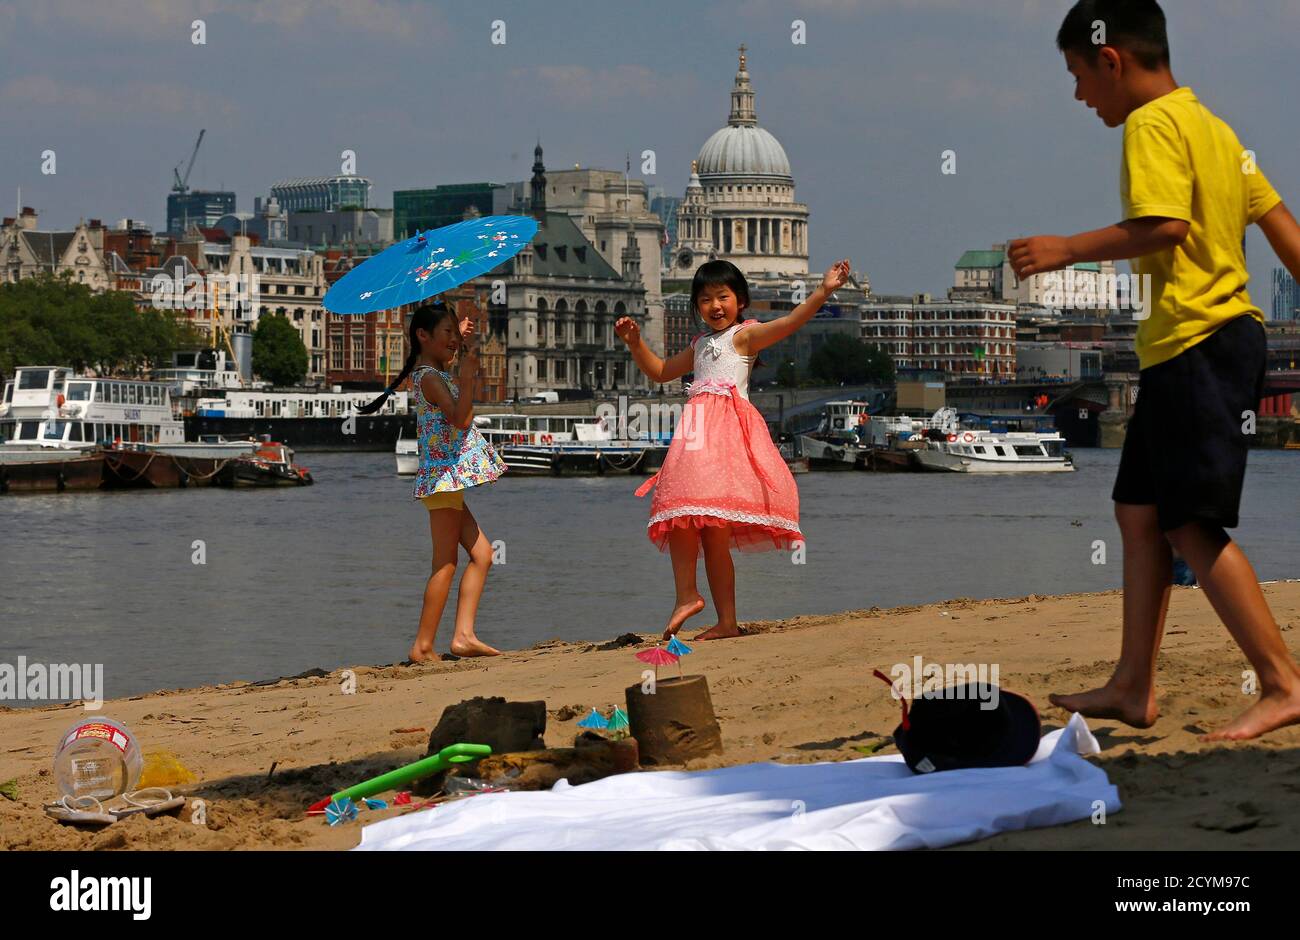 Julia Yeung (L) and Amy Liu from London enjoy the hot weather on the banks of the River Thames ahead of the London 2012 Olympic Games July 25, 2012.     REUTERS/Eddie Keogh (BRITAIN - Tags: ENVIRONMENT SPORT OLYMPICS CITYSPACE) Stock Photo